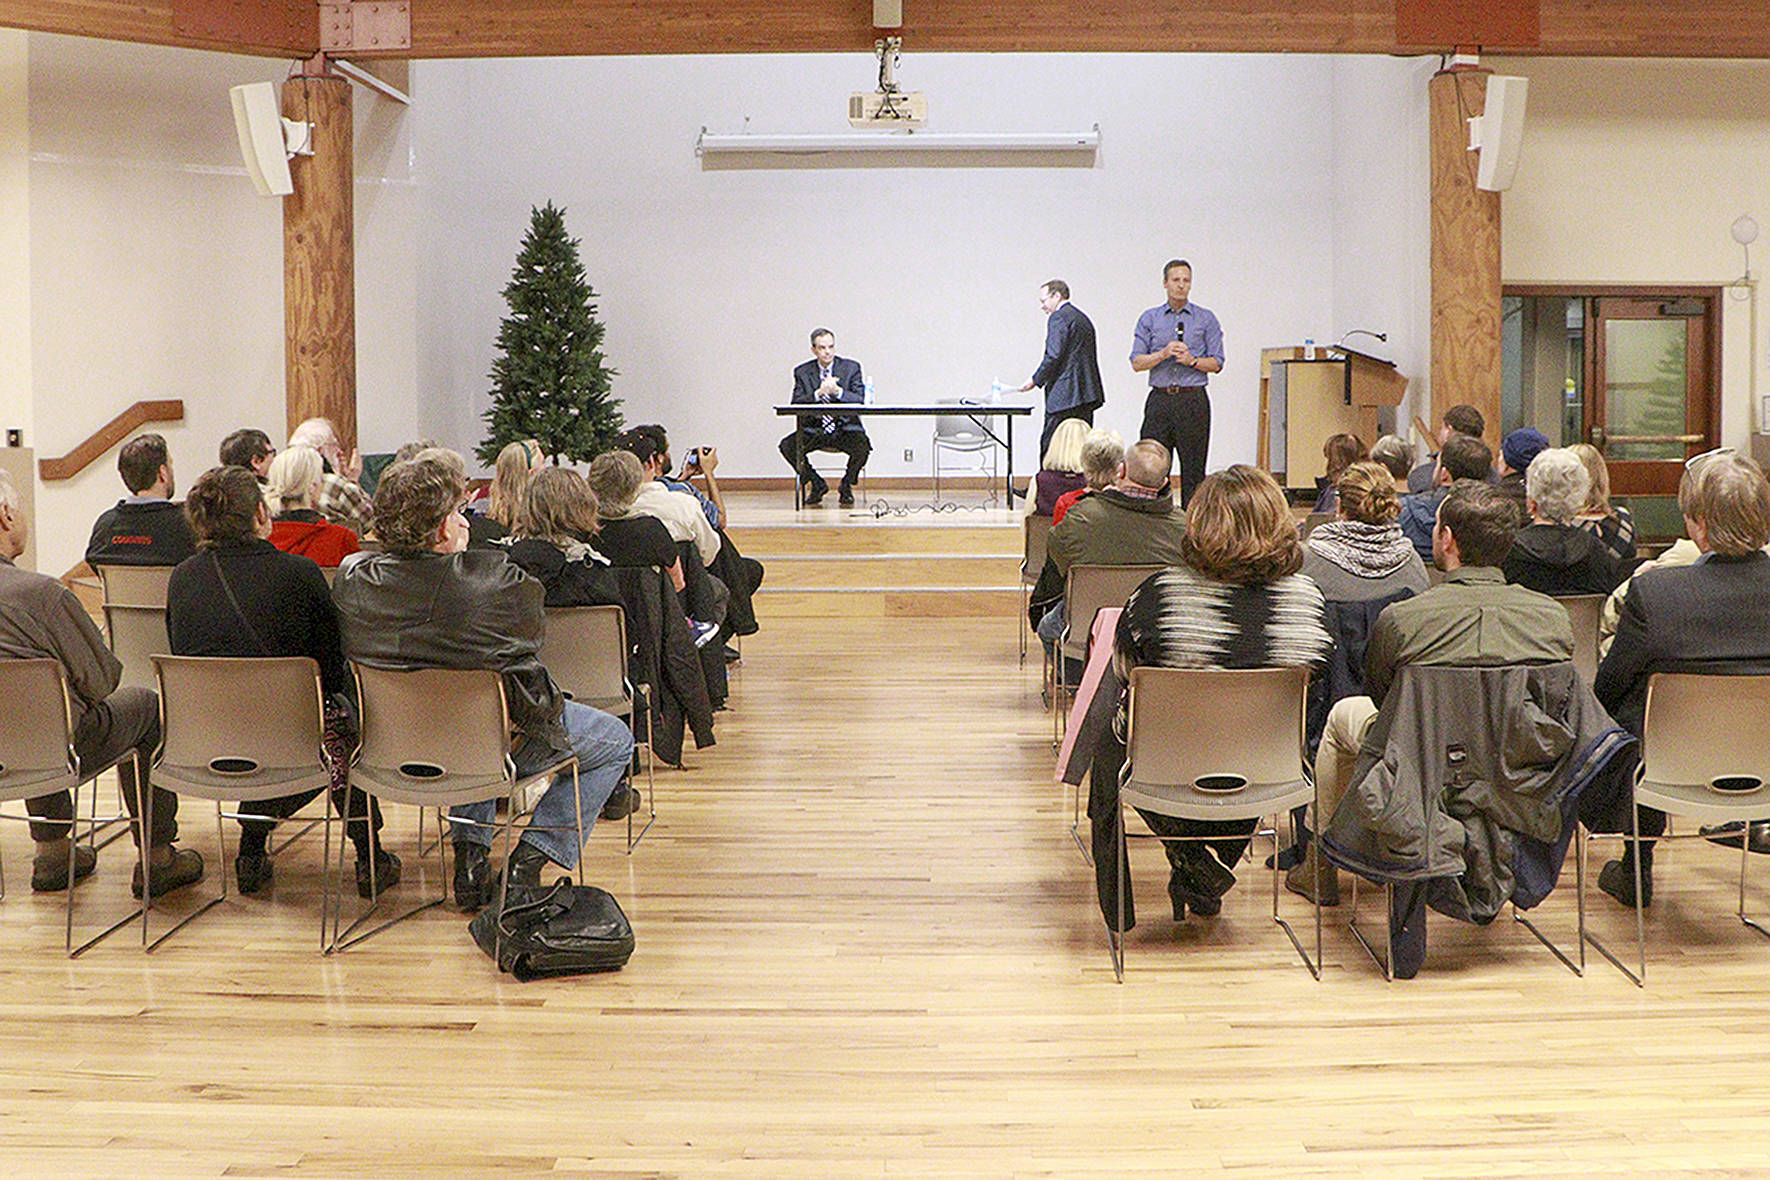 Photo courtesy Brennan Bunn. Rob Gannon, General Manager of King County Metro Transit, and Peter Rogoff, CEO of Sound Transit, and King County Councilmember Dave Upthegrove onstage at the Transit Town Hall, Dec. 4, at Renton Senior Activity Center.